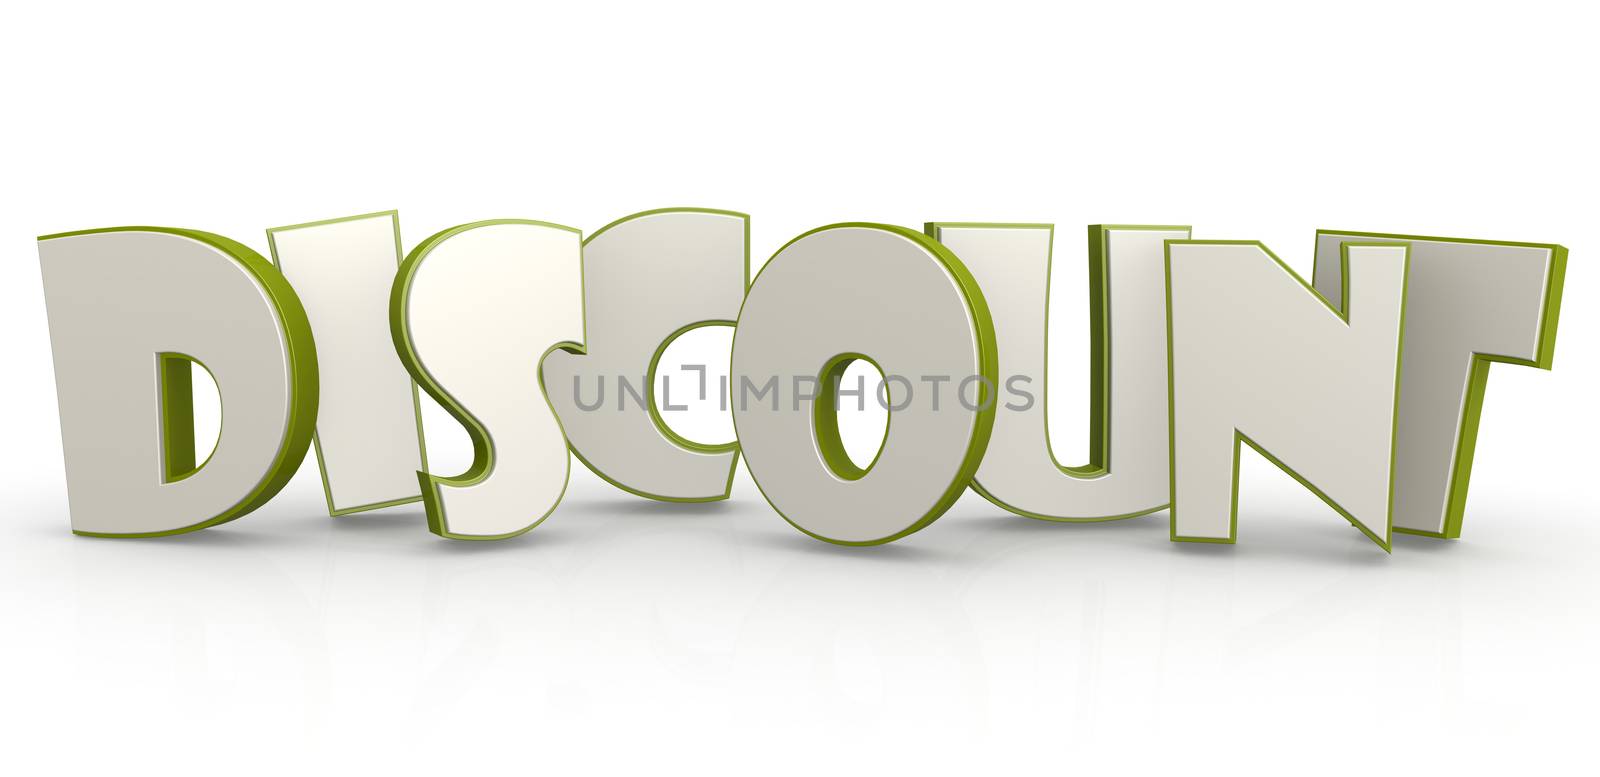 Discount word green with white background image with hi-res rendered artwork that could be used for any graphic design.